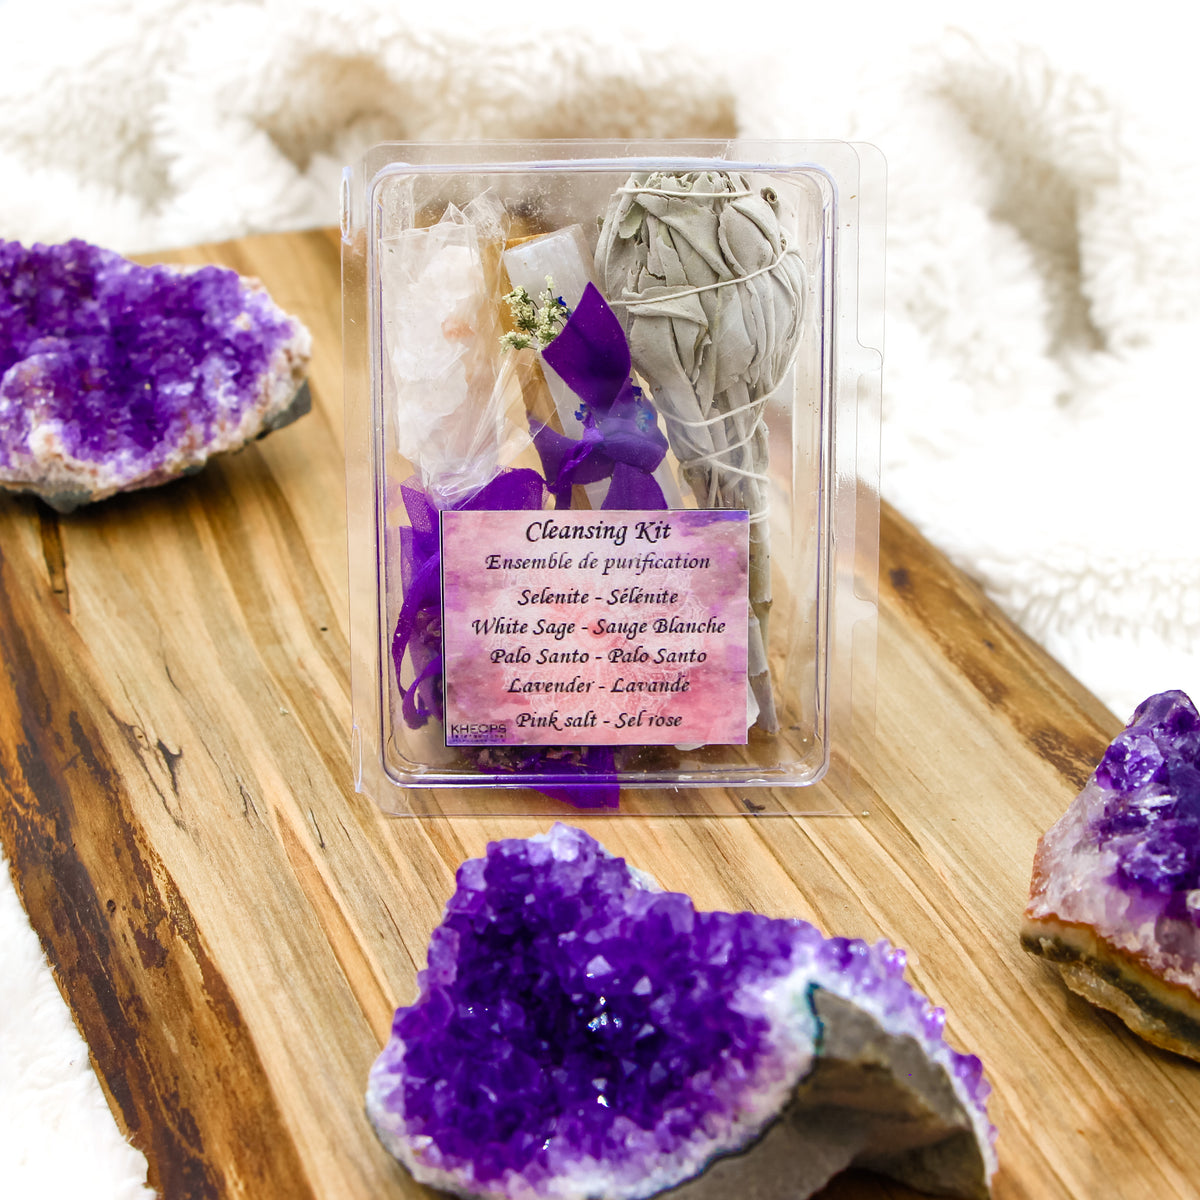 smudging kit, sage bundle, smudge kit, smudge set, beginners smudge, how to smudge, what do I need to smudge, tools for smudging, space clearing, energy clearing, smudging kits, crystal kits